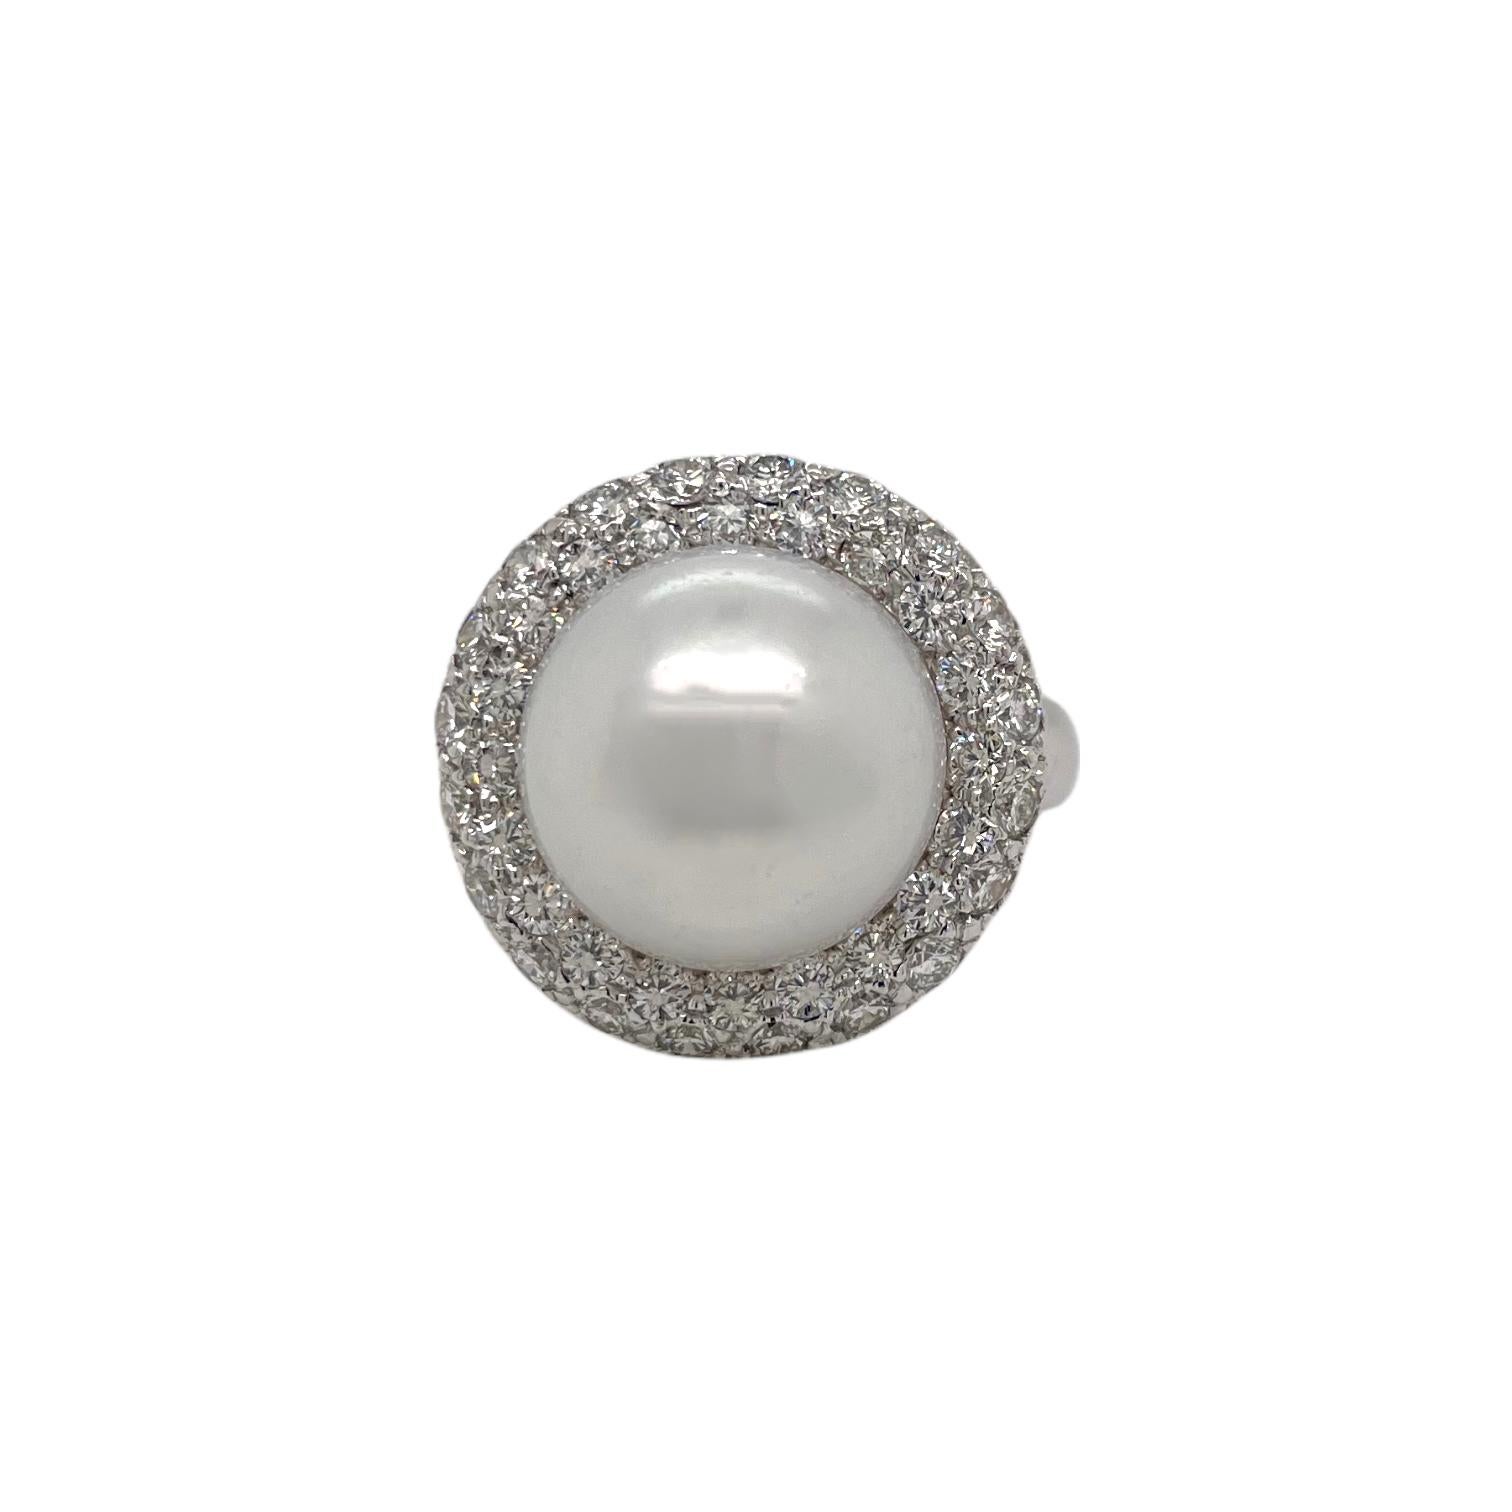 Ring contains one 12.8mm South Sea Pearl and 60 round brilliant diamonds surrounding within a pave style halo, approximately 1.50tcw. Diamonds are near colorless and SI1 in clarity, excellent cut.  

All of our pieces are packaged carefully and